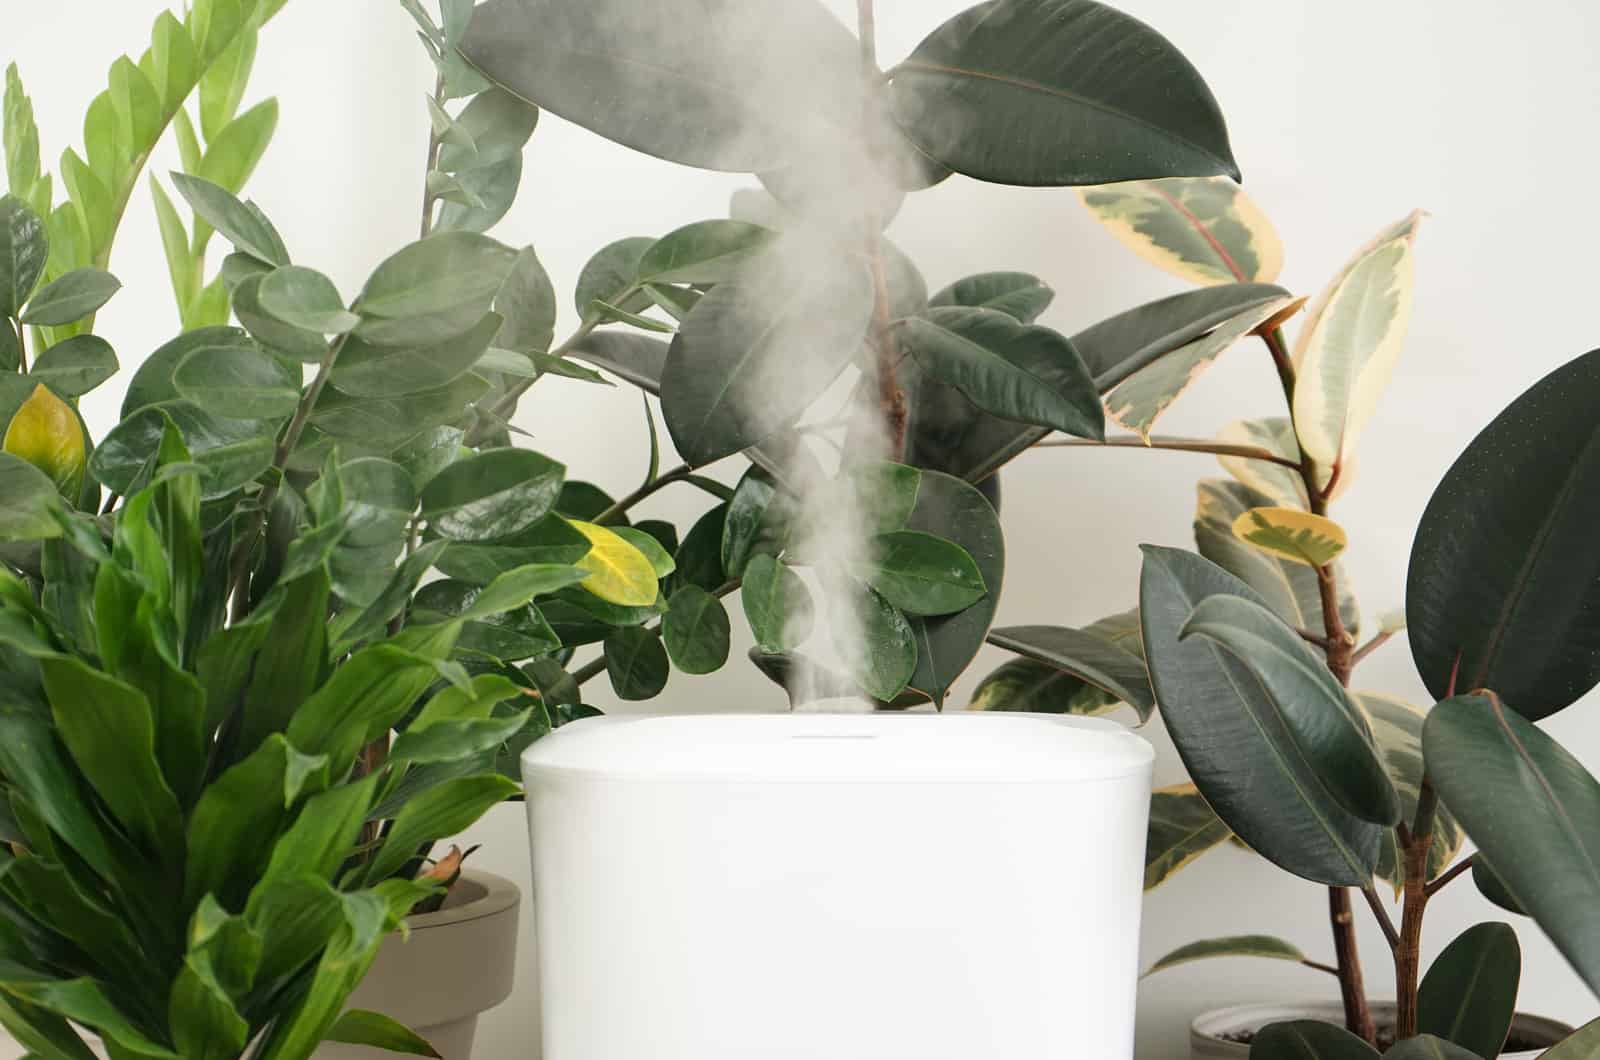 Humidifier in middle of plants